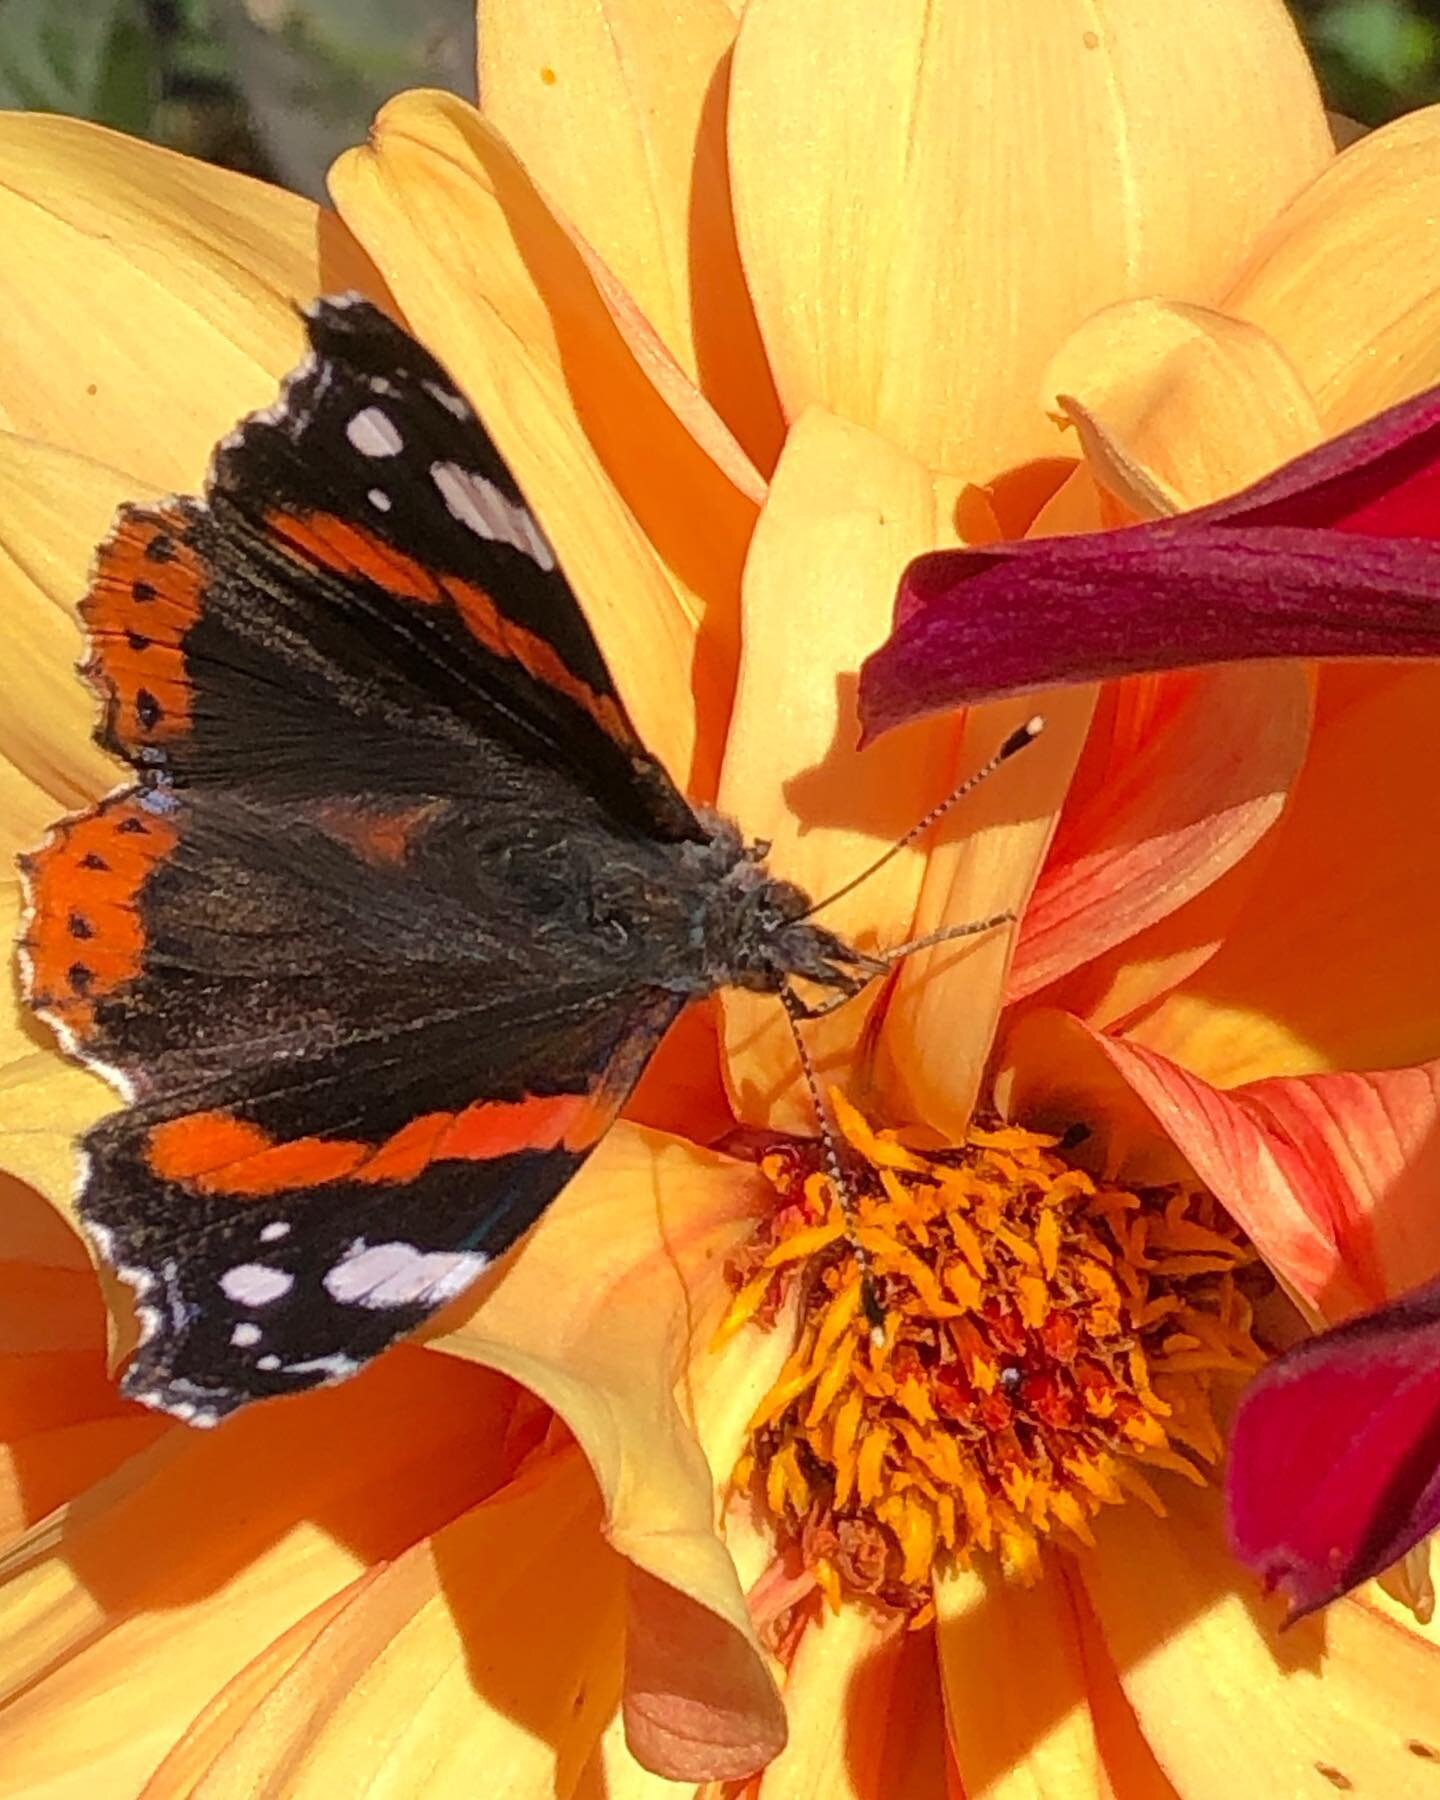 Red Admiral feeding on nectar from &lsquo;David Howard&rsquo; dahlia